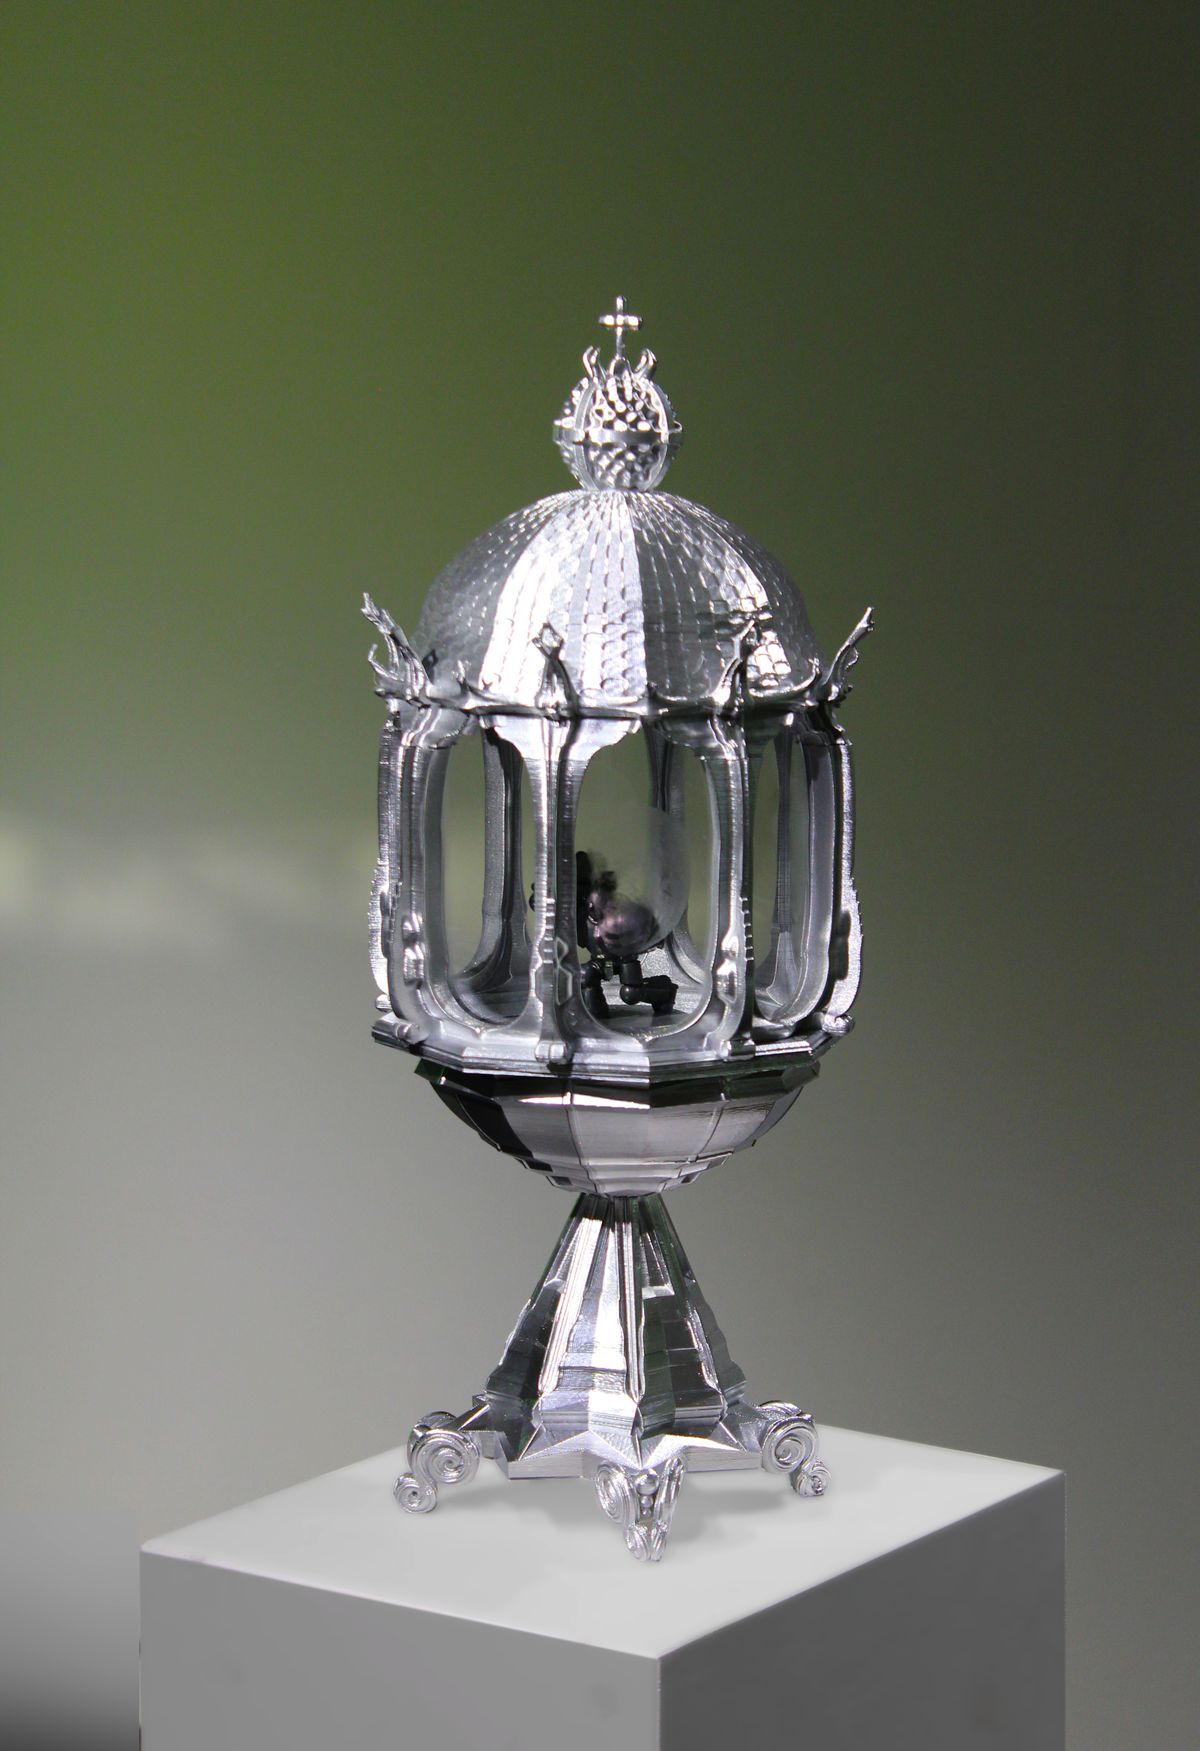 An ornate silver reliquary containing a Warhammer 40,000 Space Marine figurine in a kneeling position